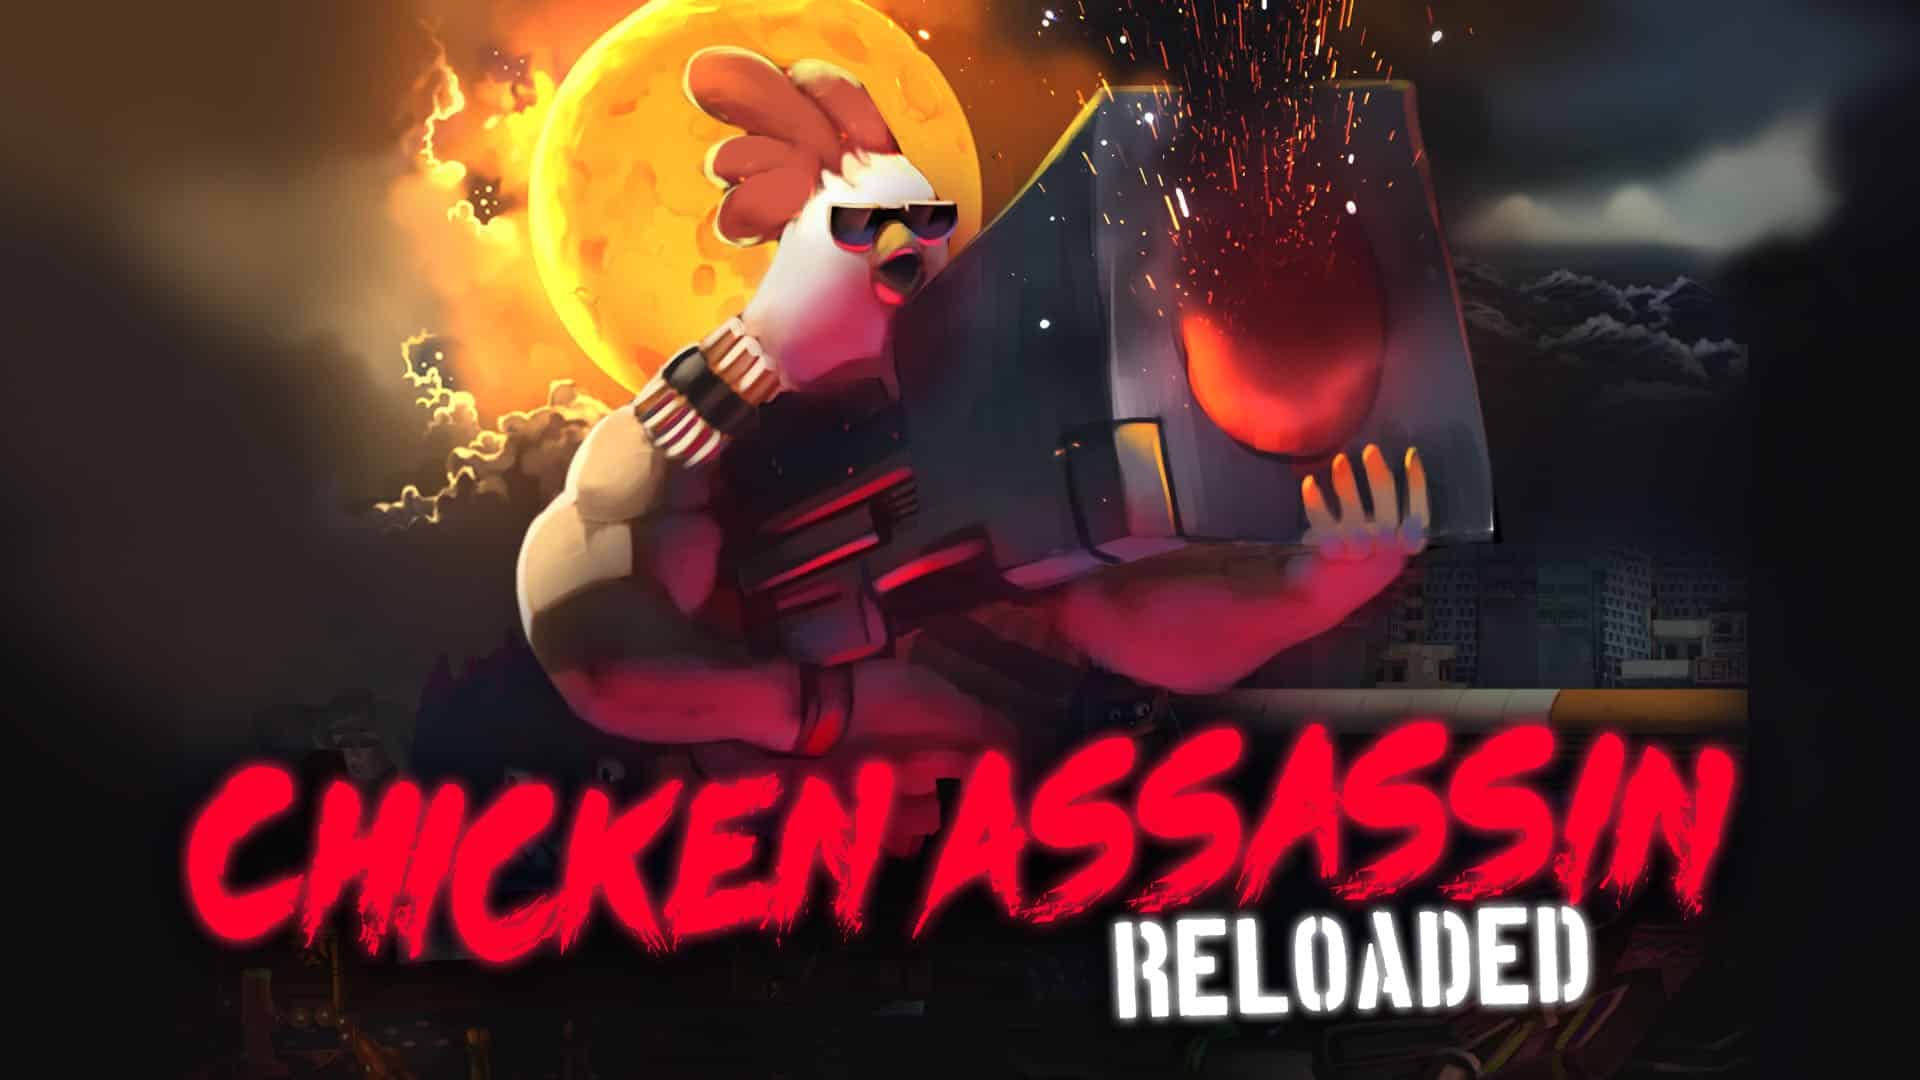 Chicken Assassin: Reloaded player count stats